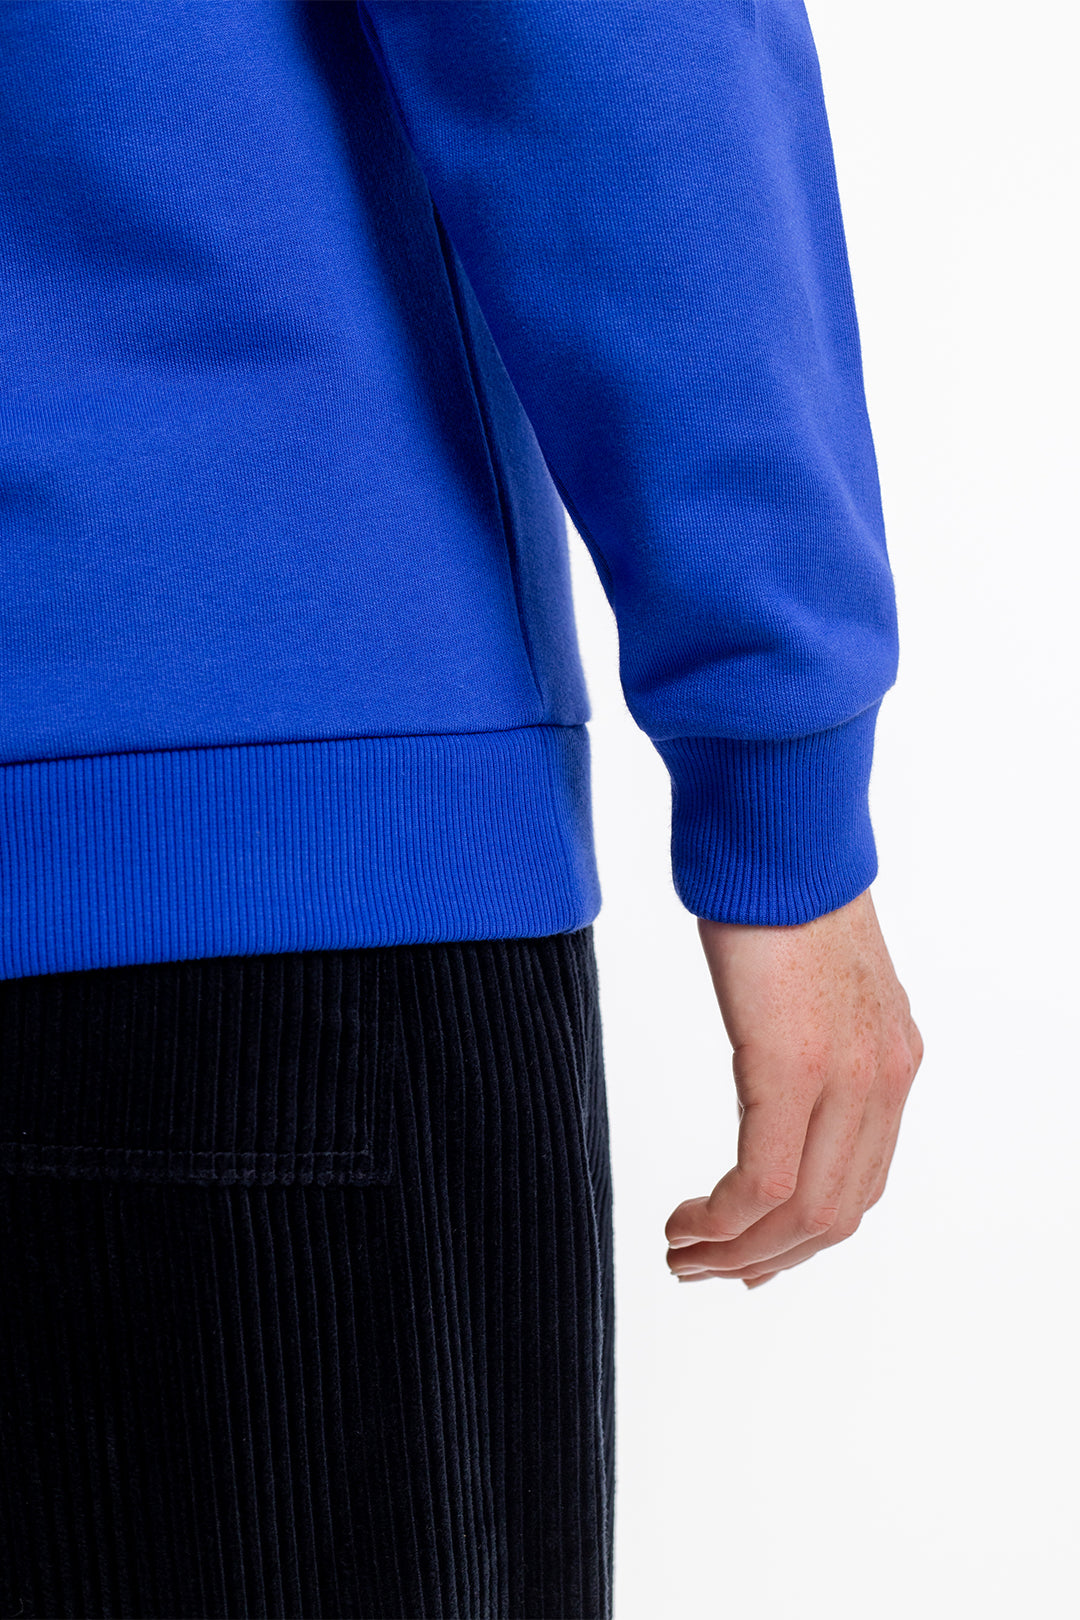 Dark blue sweater welcome print made from 100% organic cotton from Rotholz